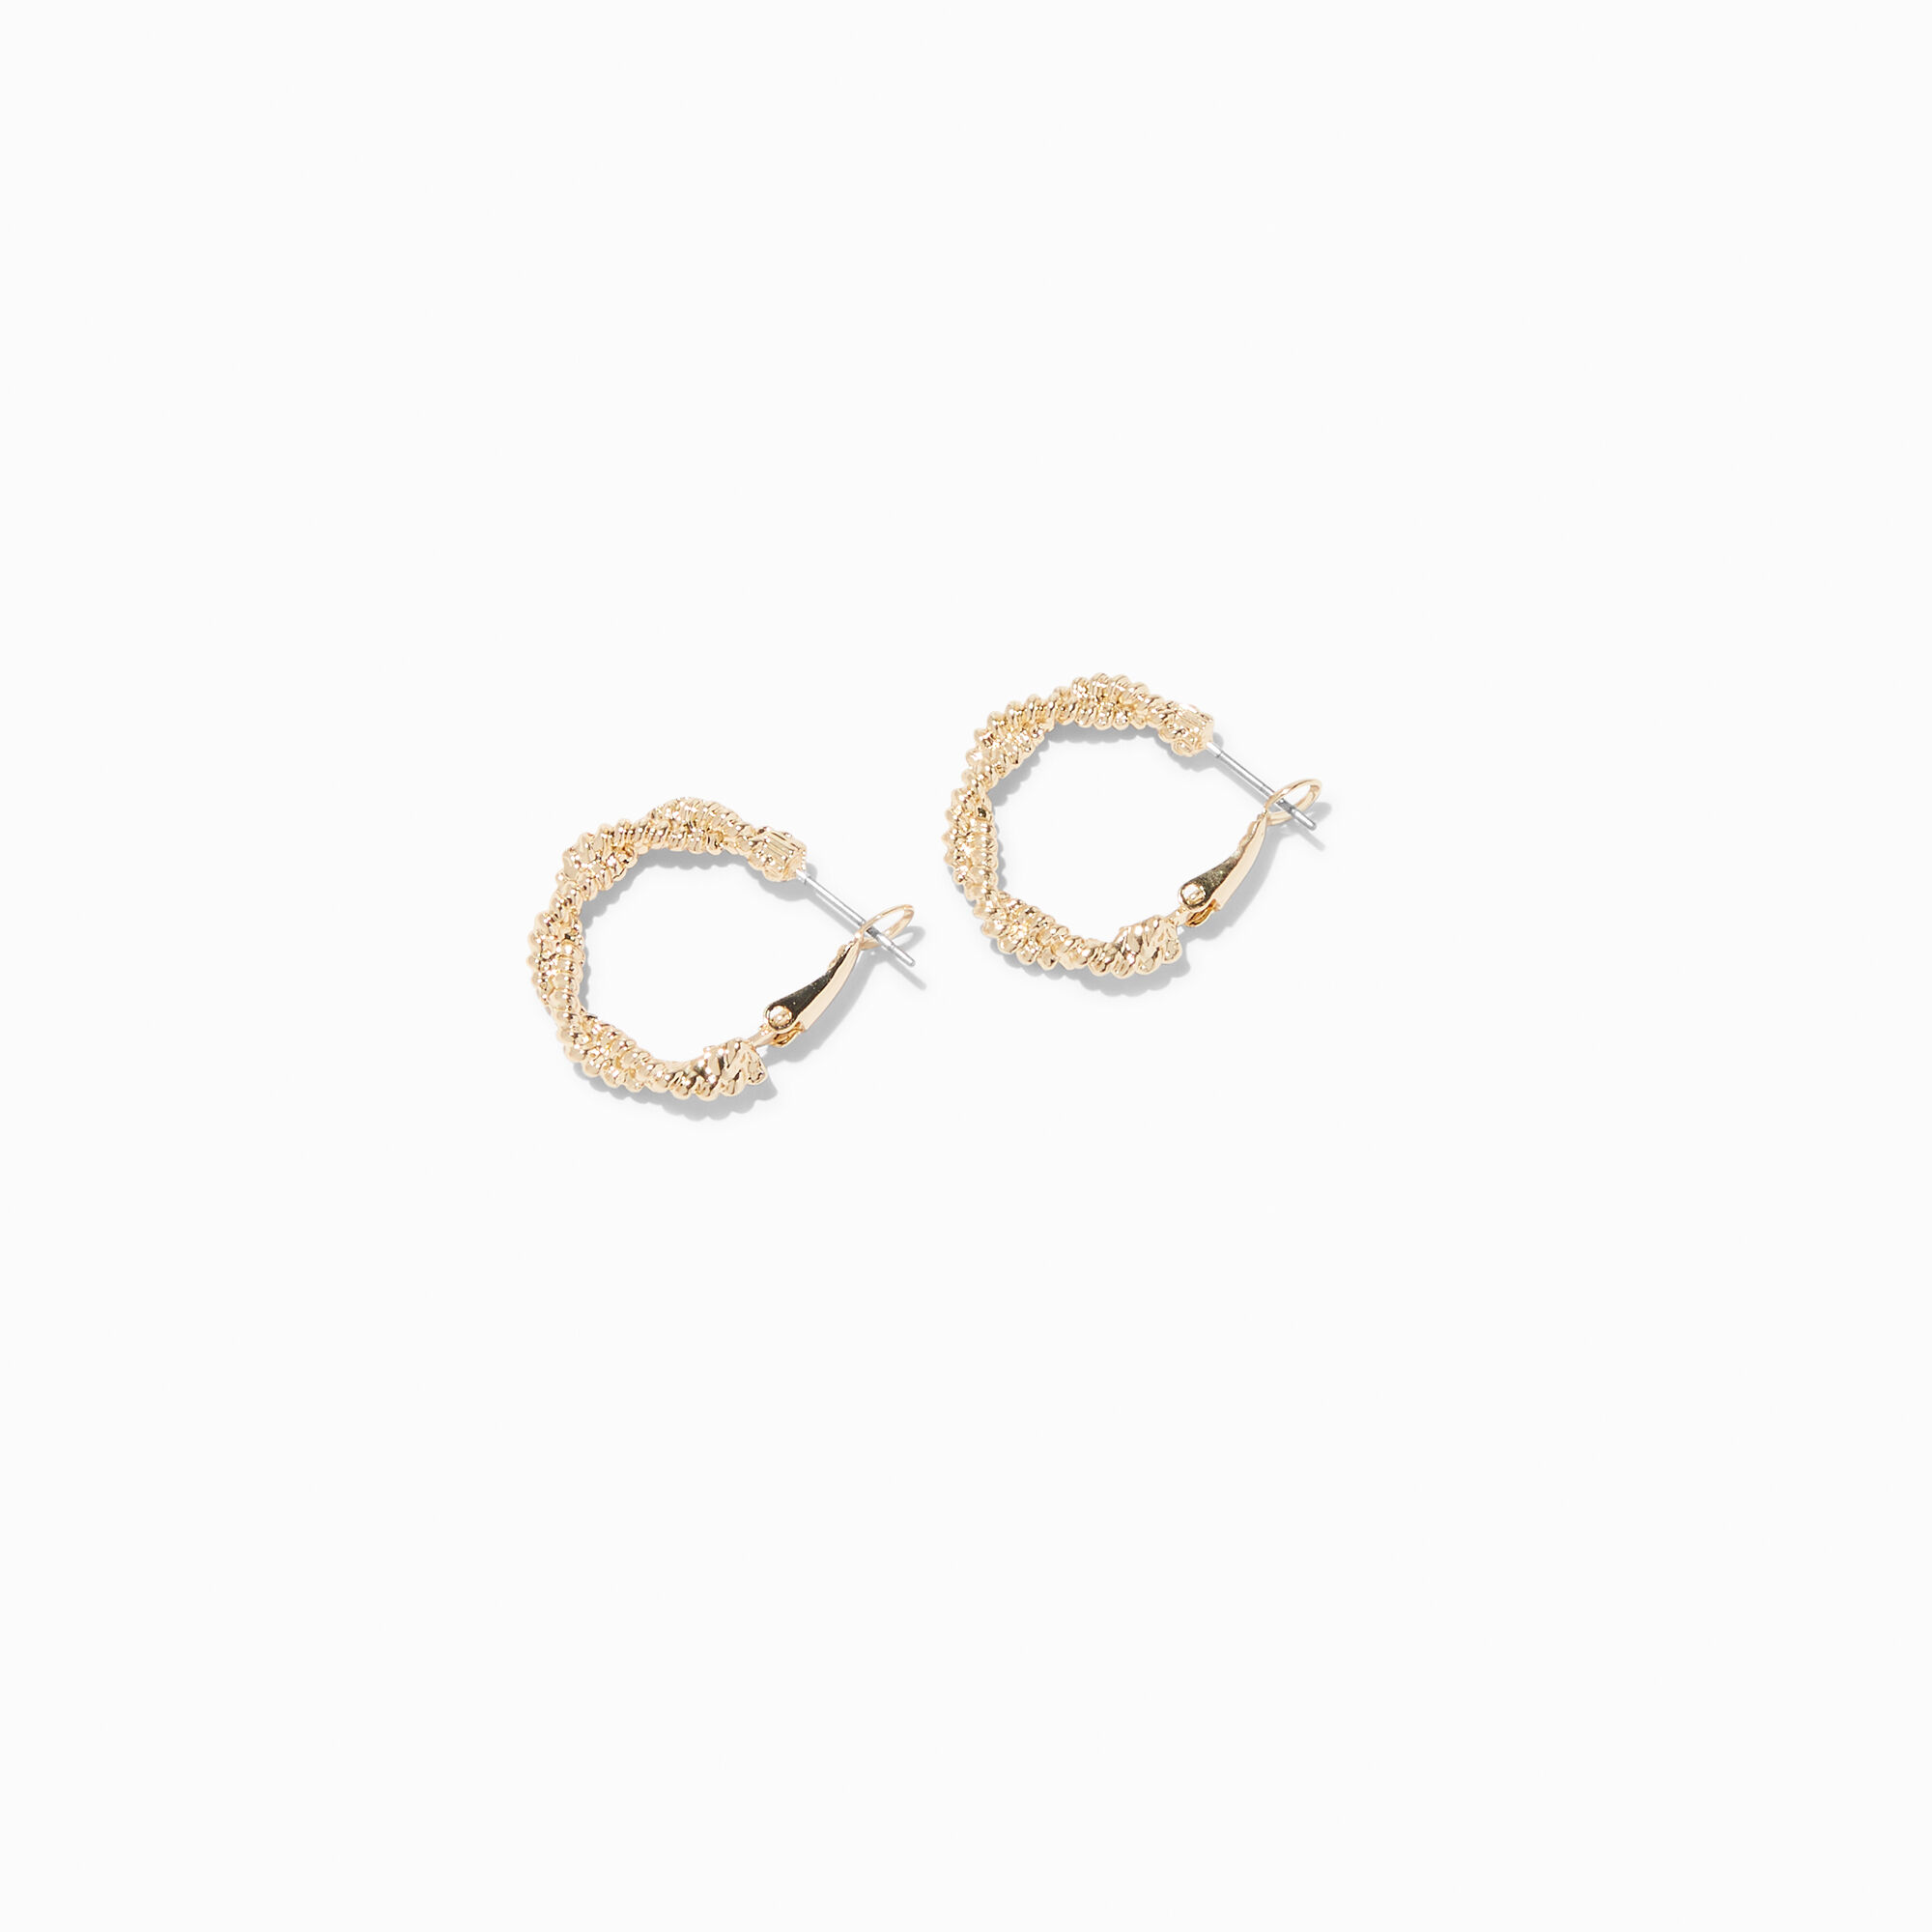 View Claires Tone Twisted Braid Hoop Earrings Gold information